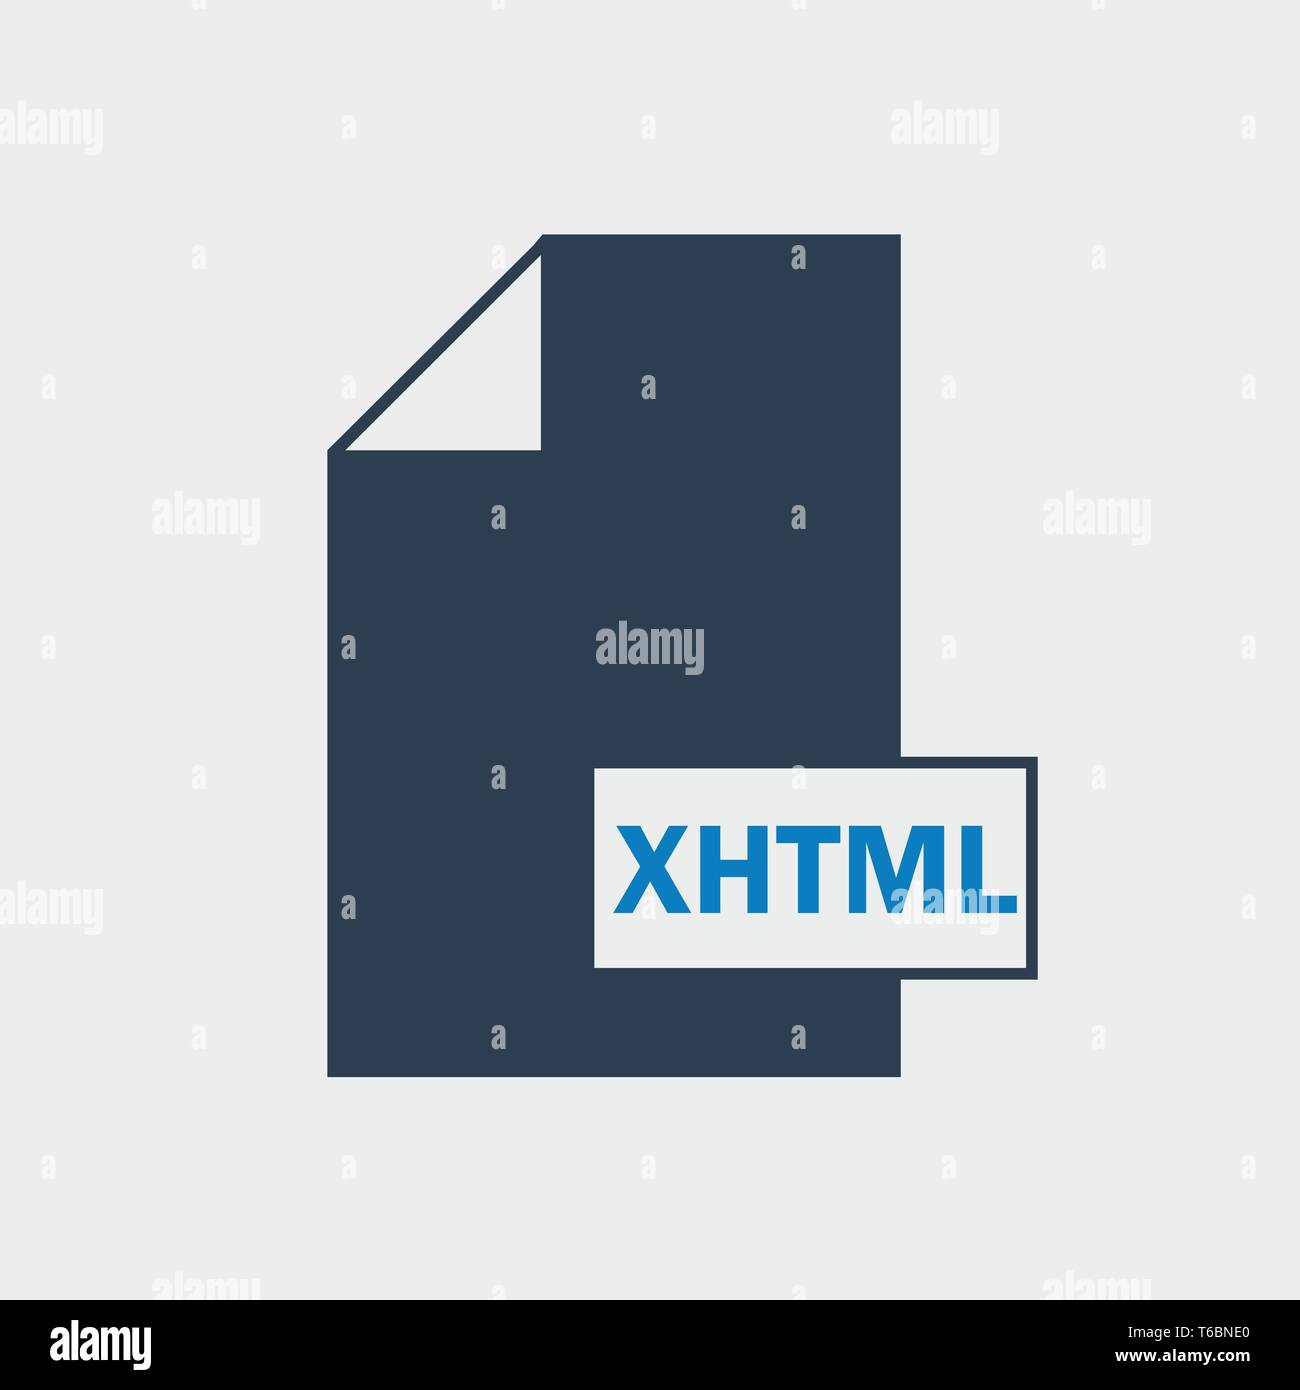 Extensible Hypertext Markup Language (XHTML) file format icon on gray background Stock Vector